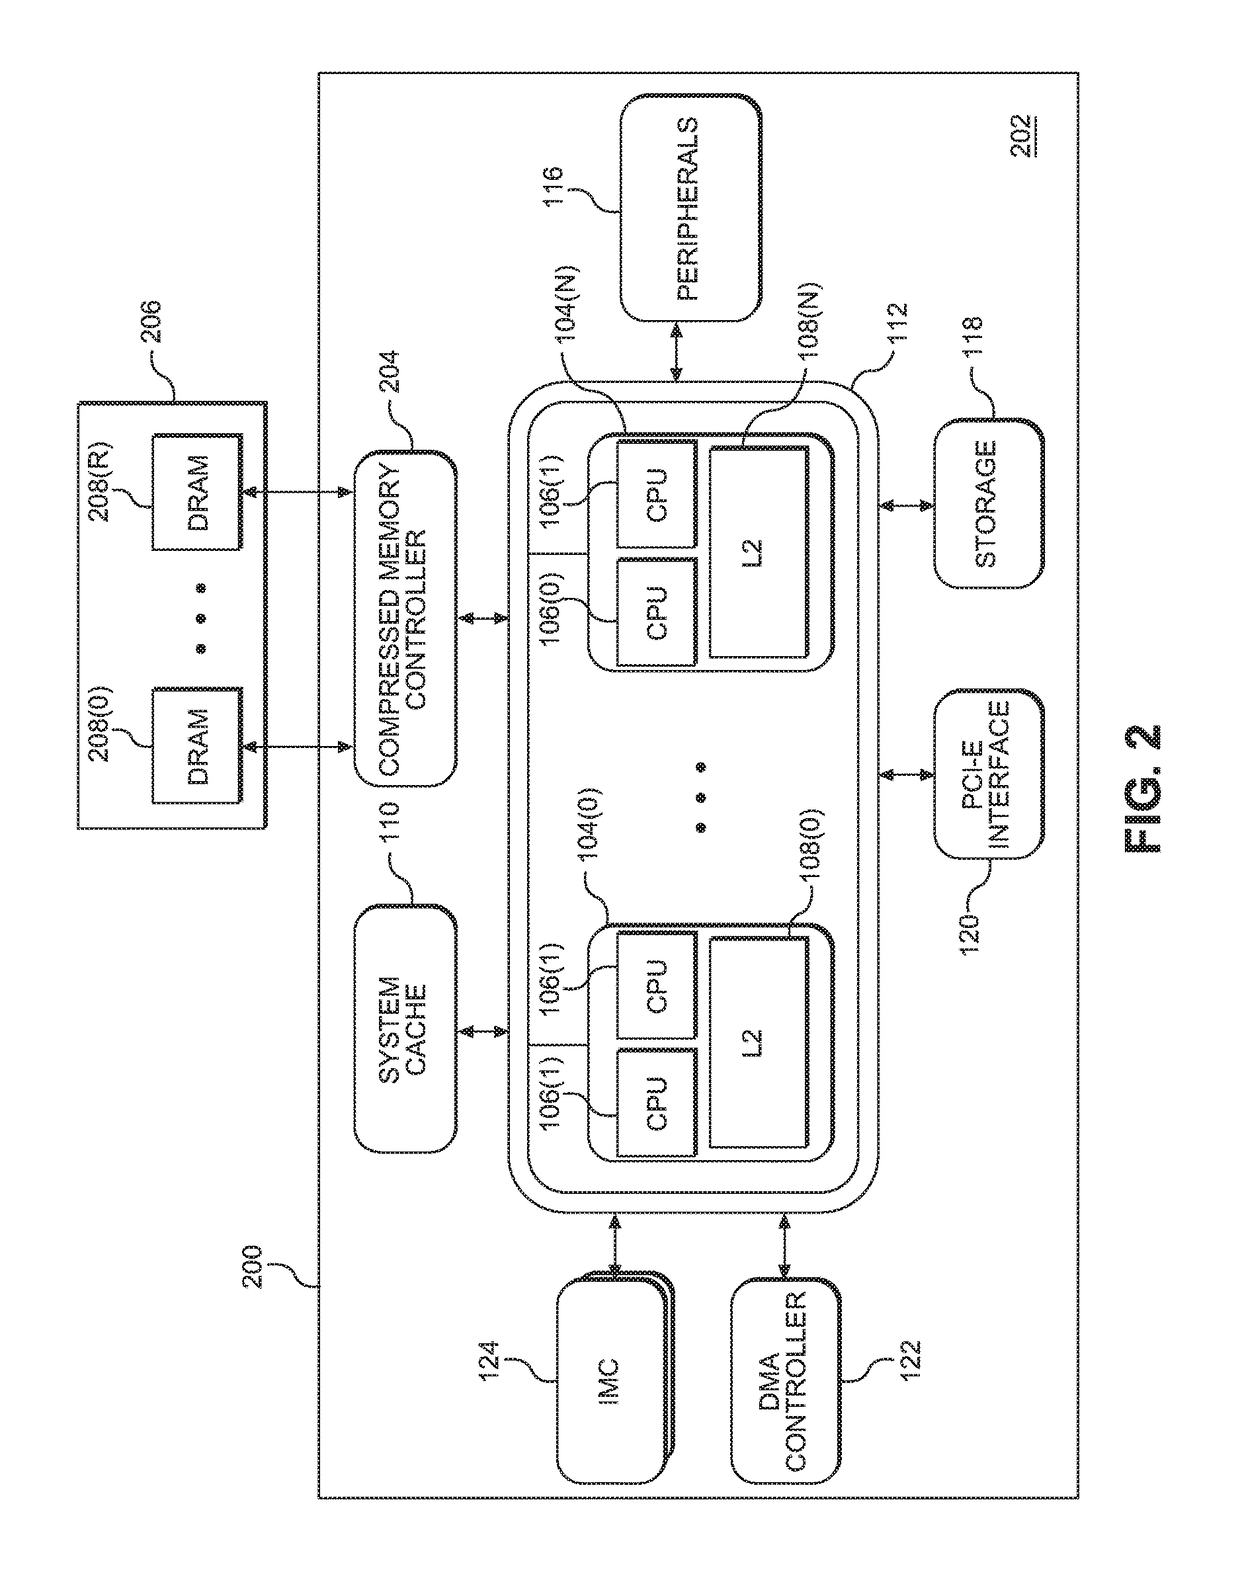 Providing memory bandwidth compression using compression indicator (CI) hint directories in a central processing unit (CPU)-based system